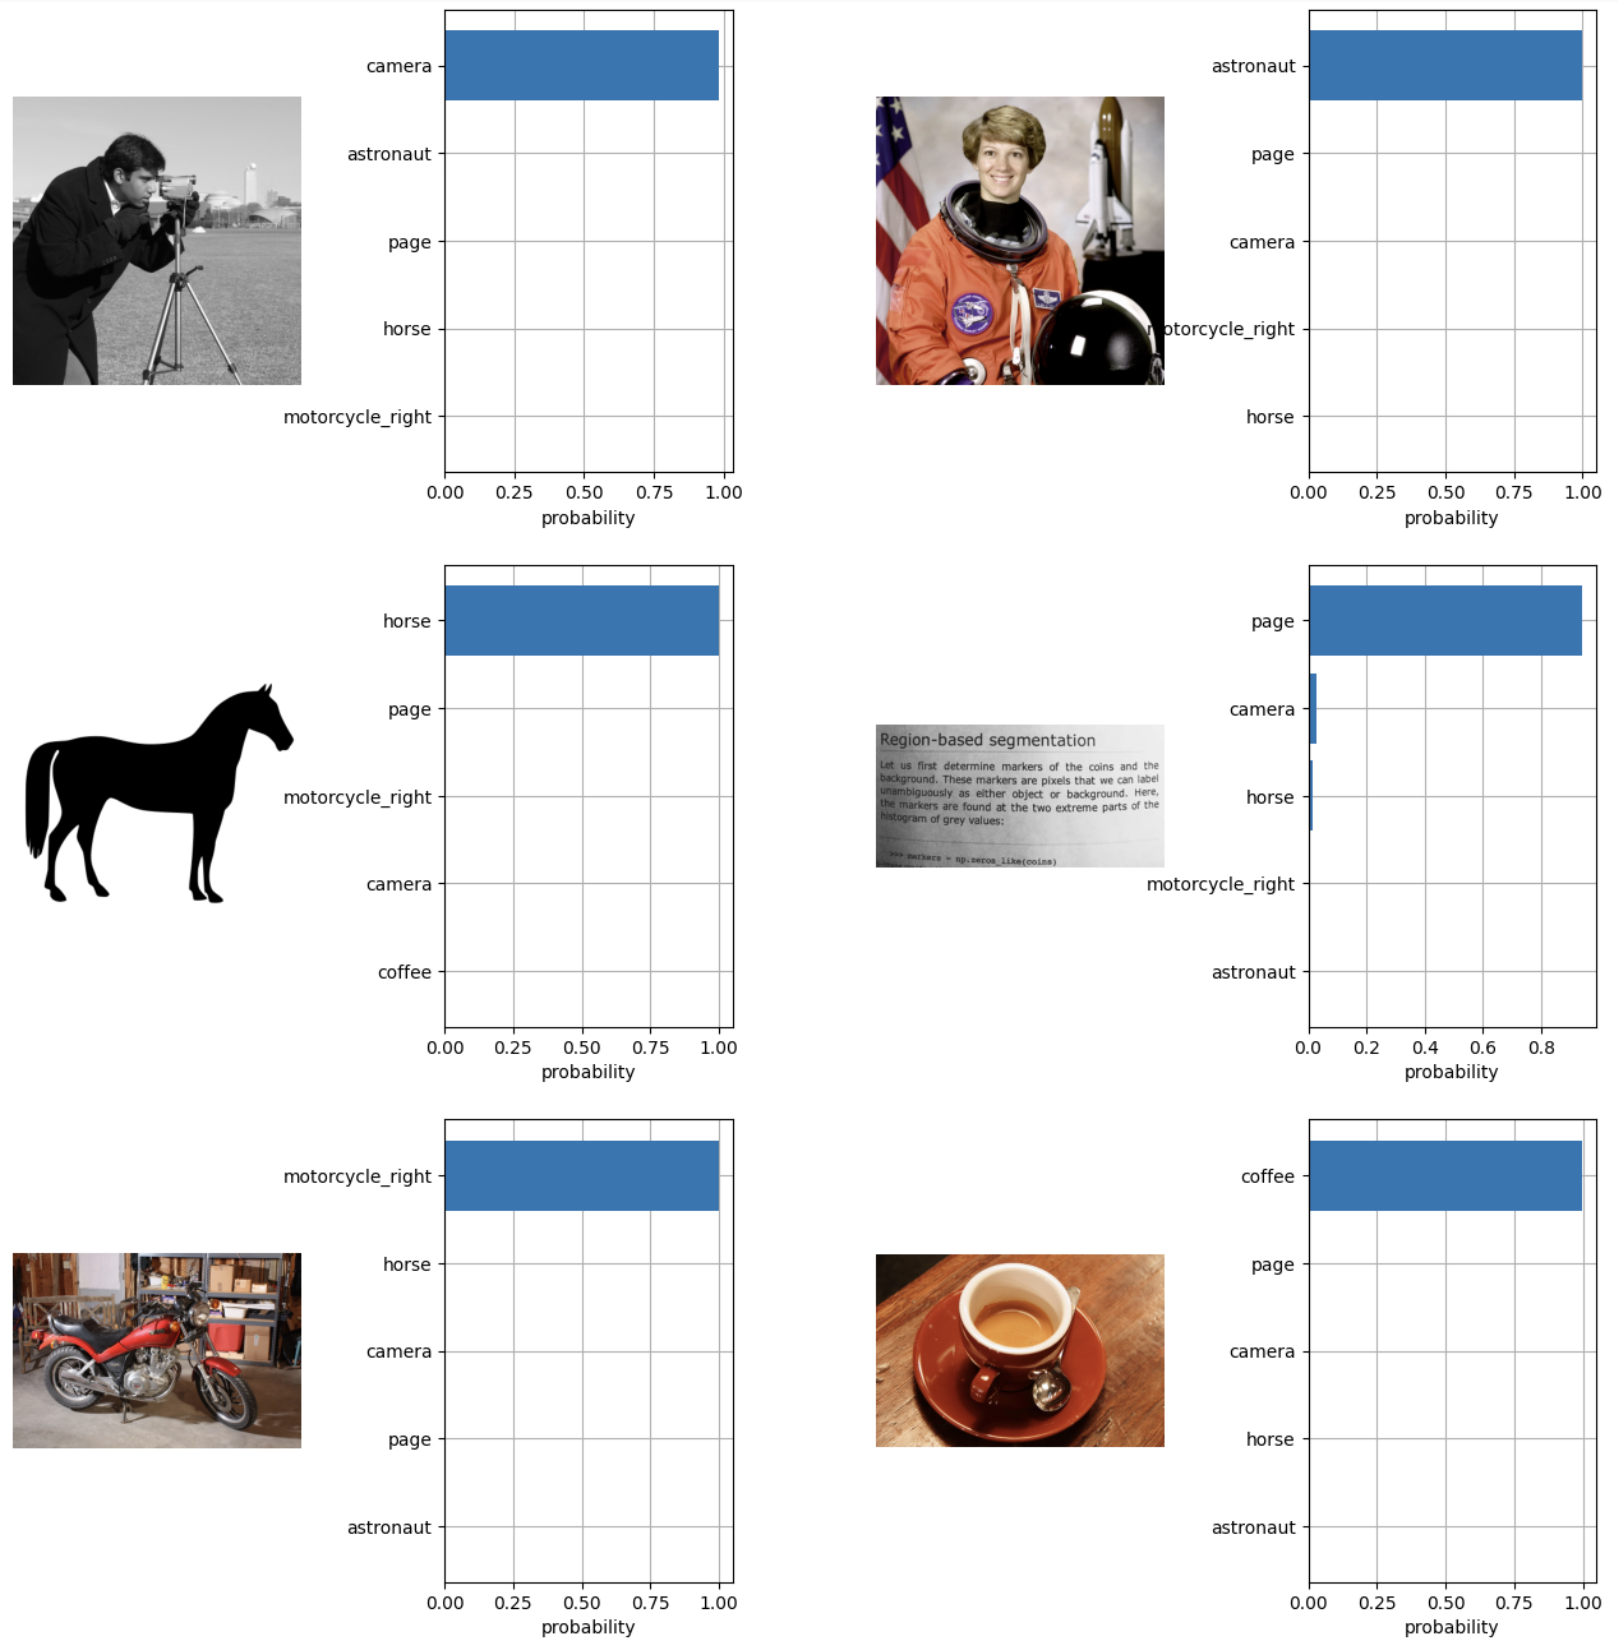 View the visualized model image results